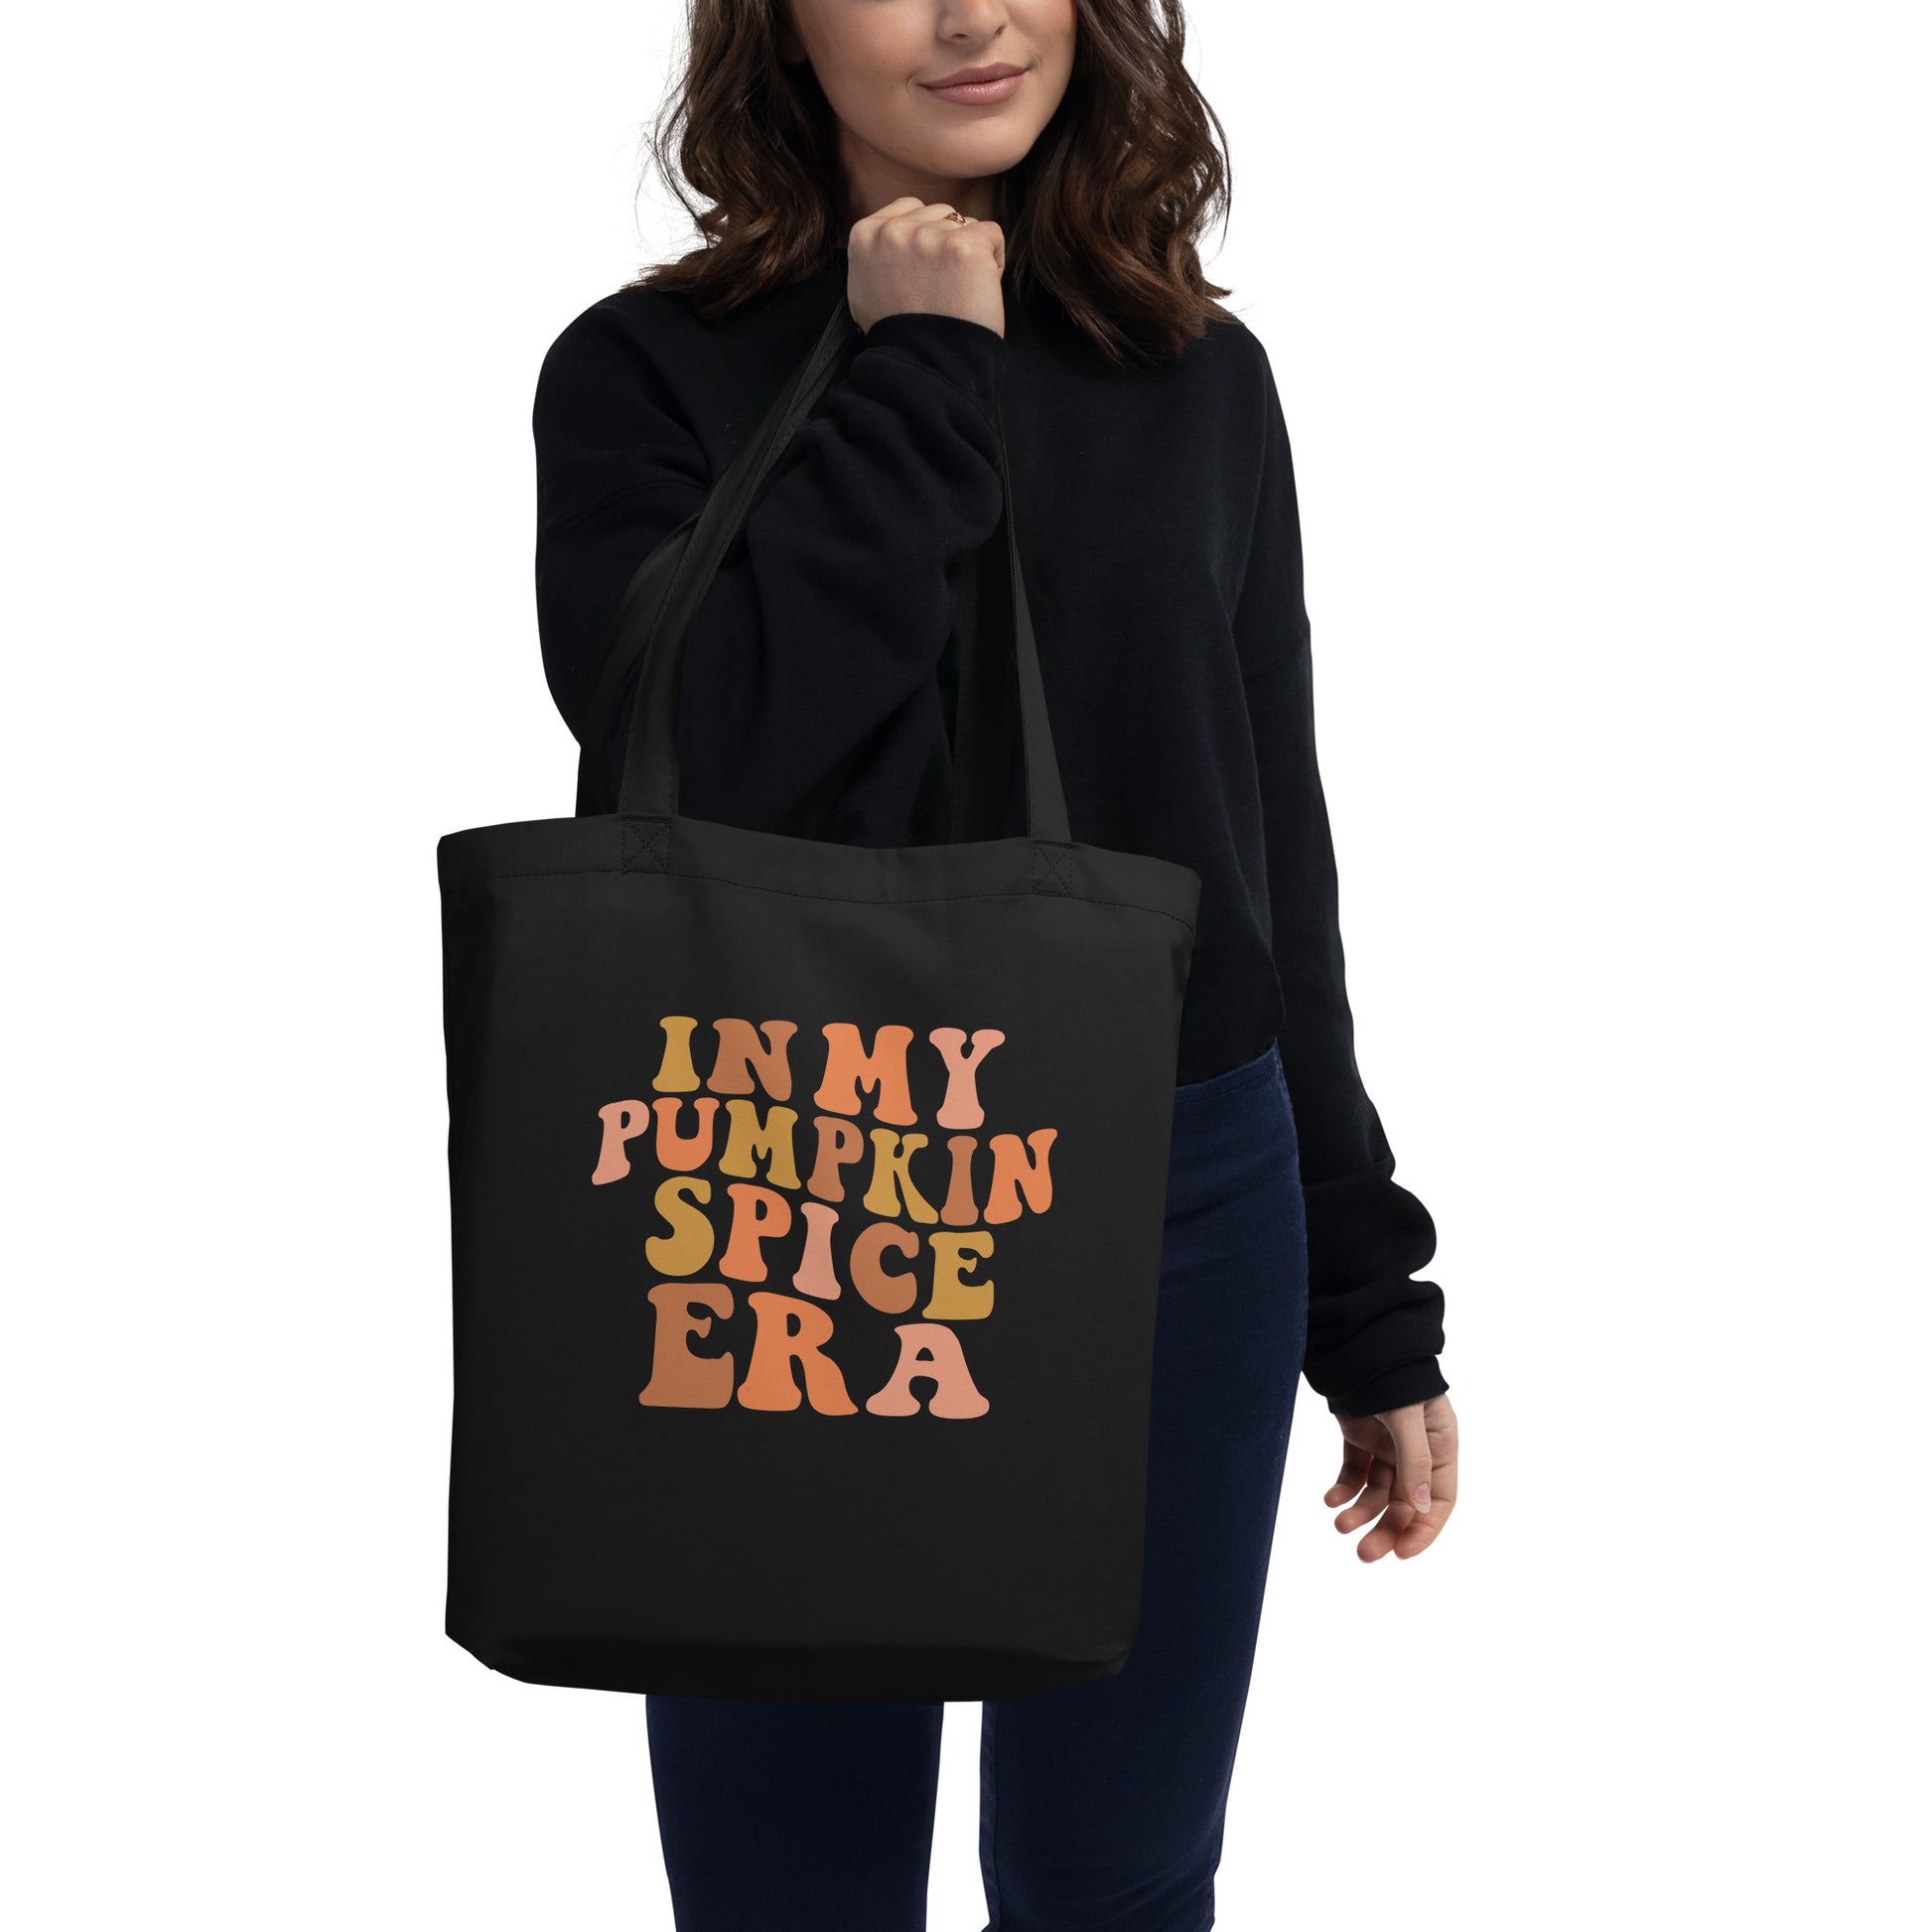 Woman holding Black cotton tote bag that says "In My Pumpkin Spice Era"